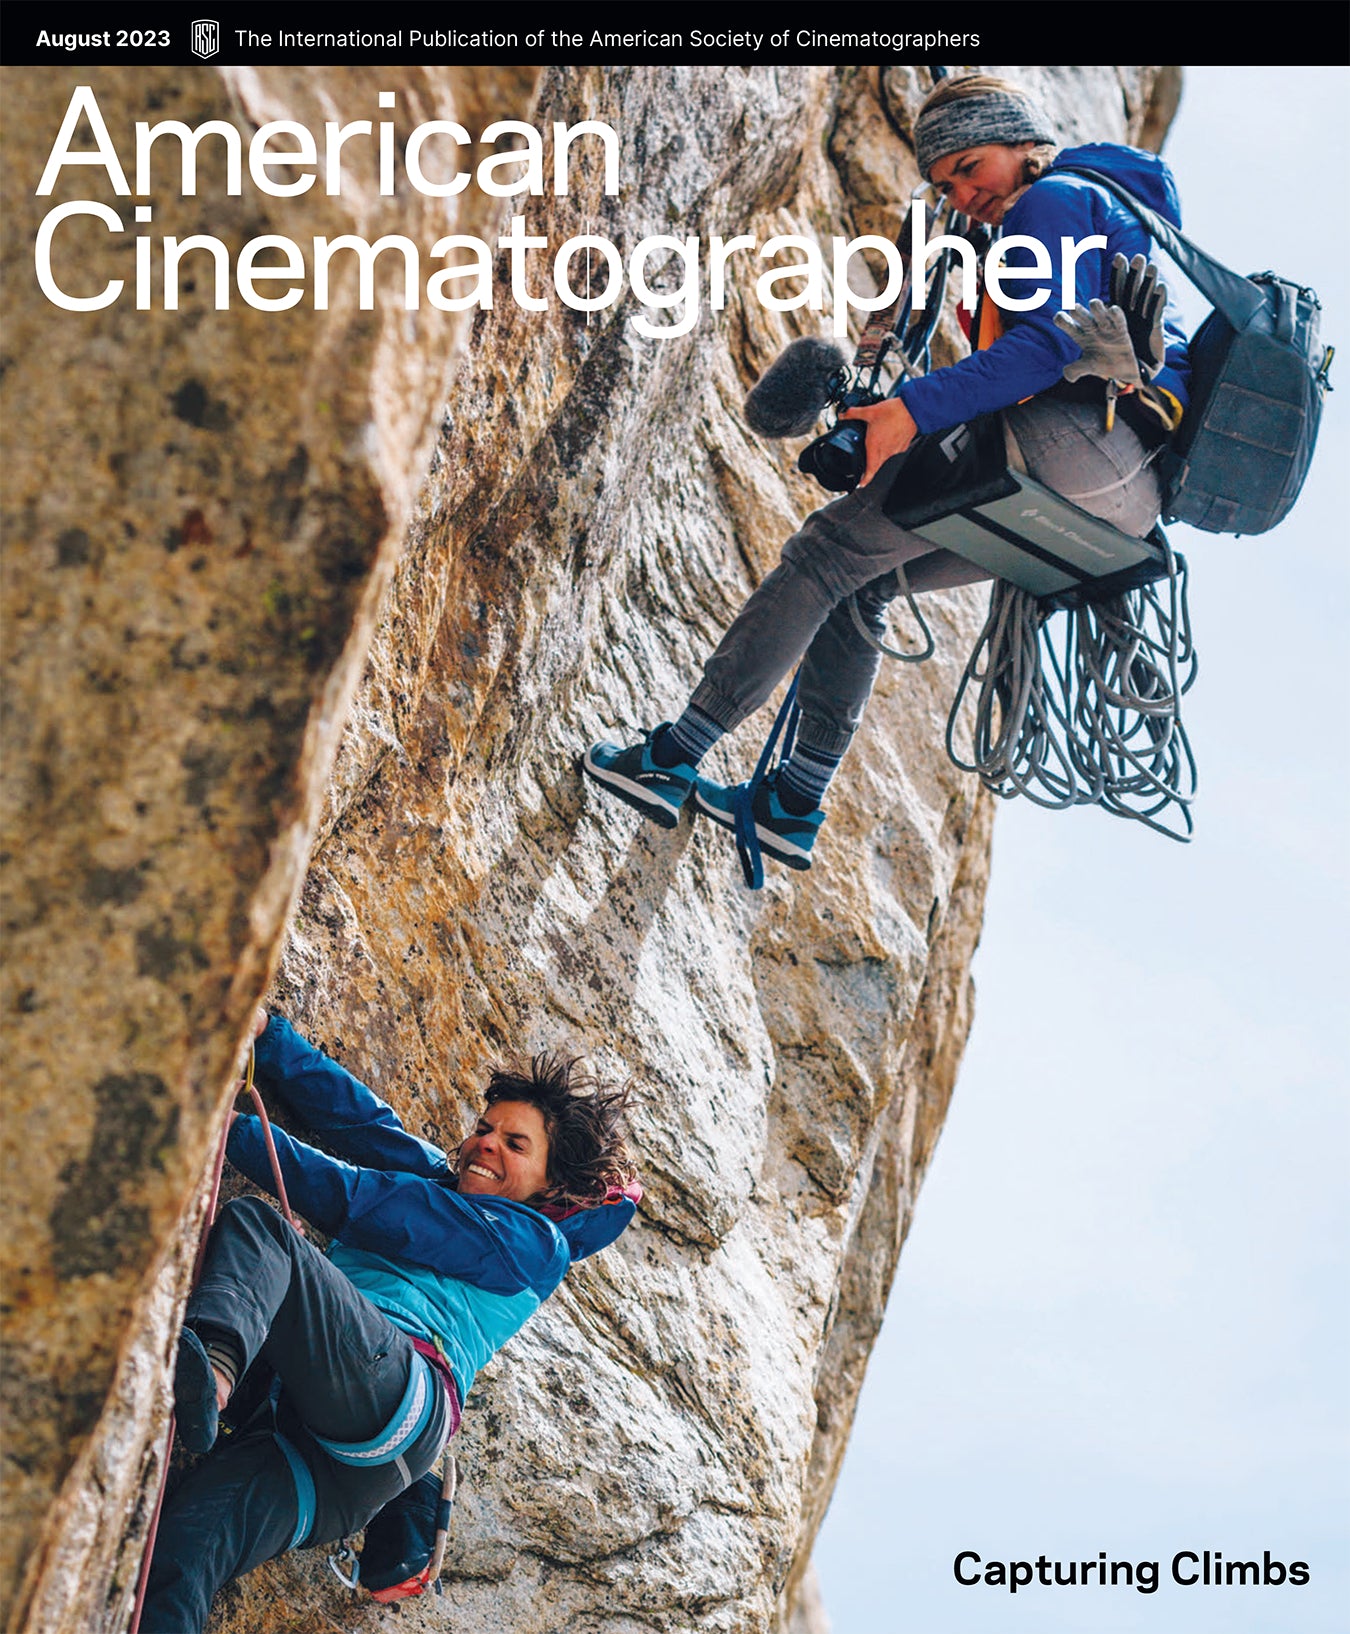 August 2023 Issue of American Cinematographer